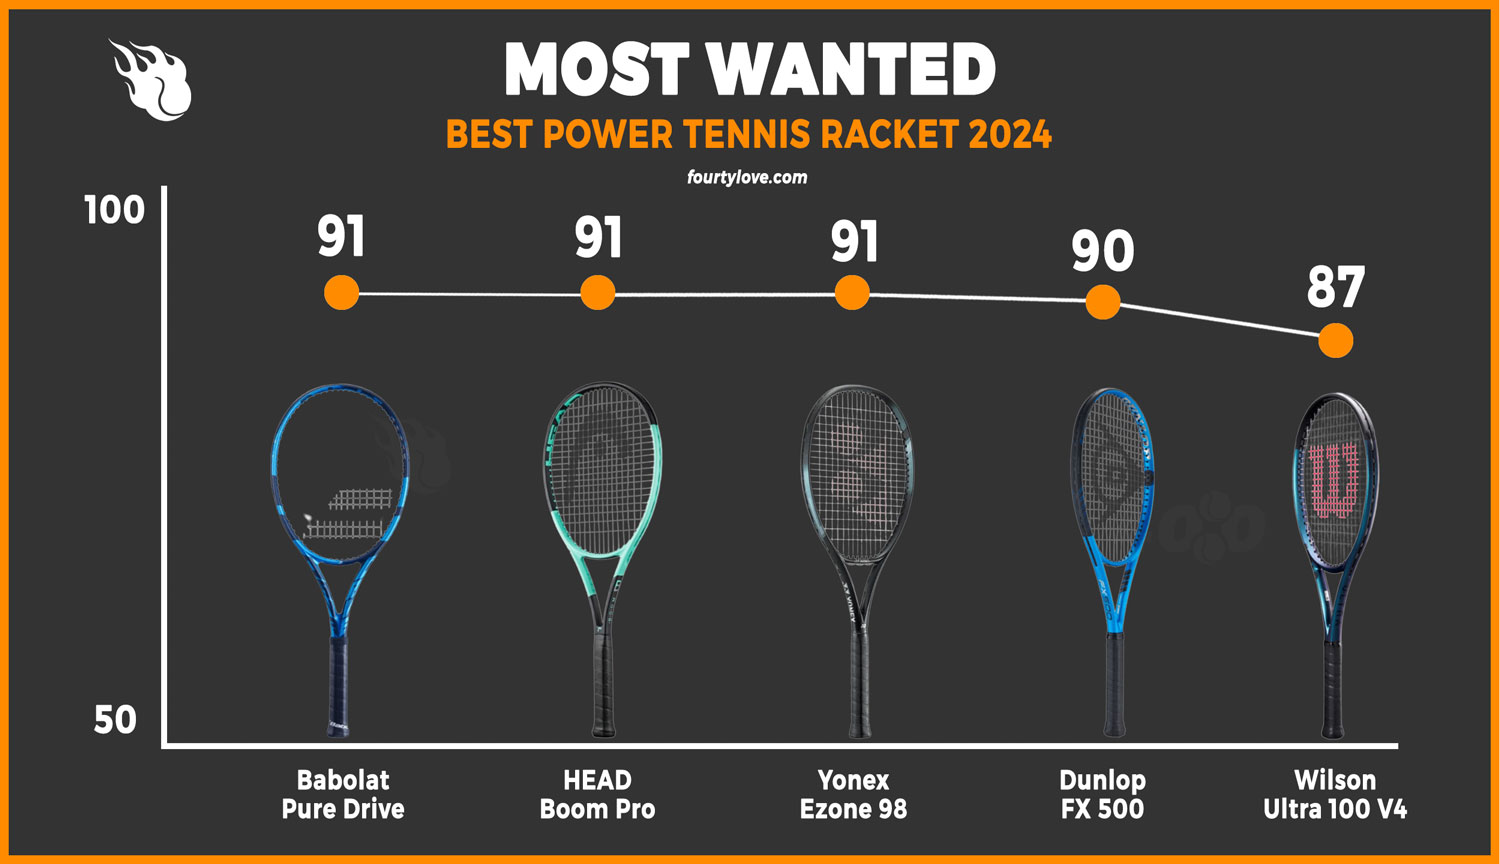 most wanted tennis racket 2024 for power